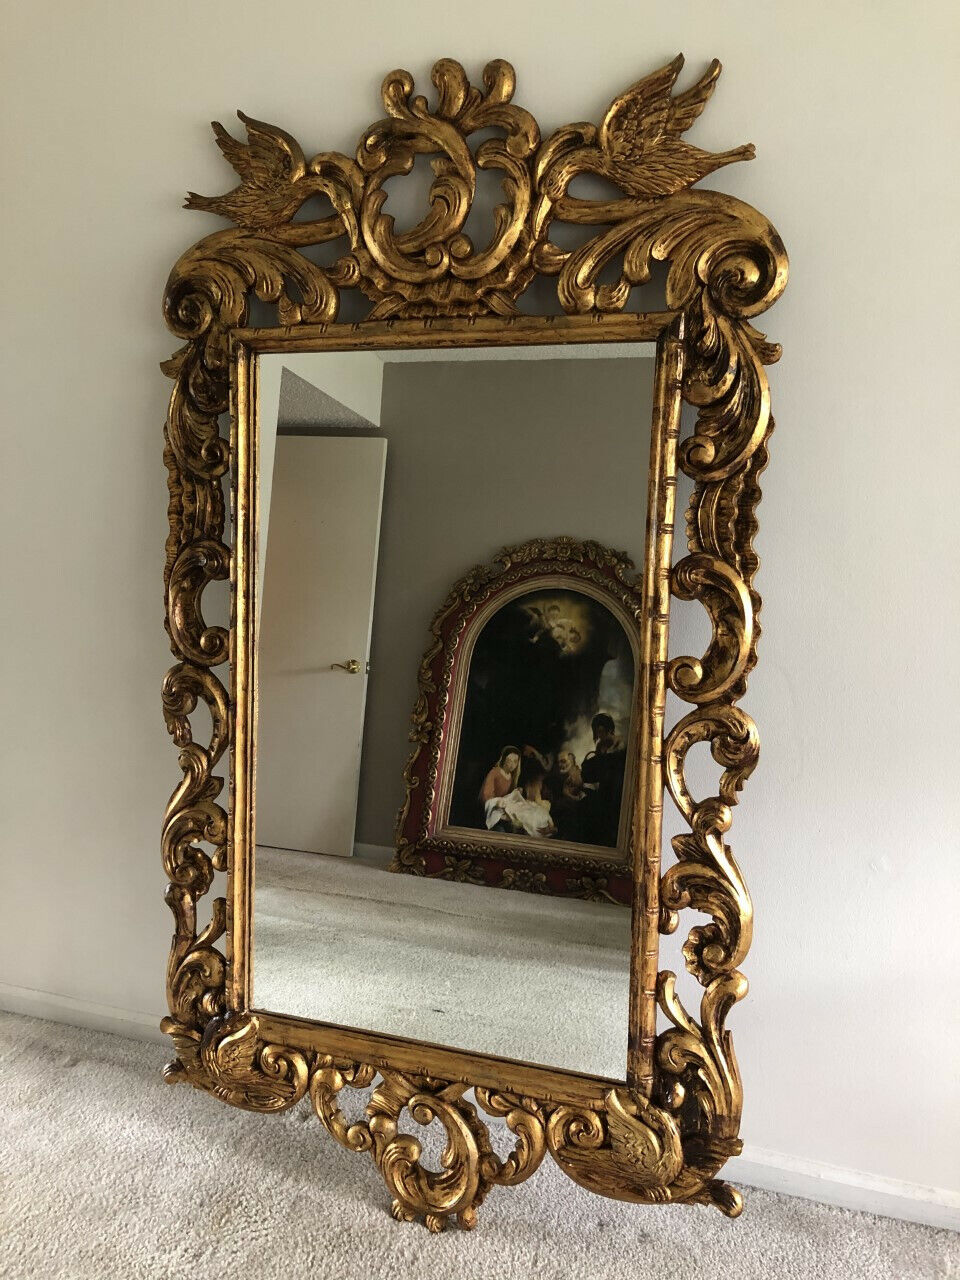 Wall Mirror in Gold Leaf with Phoenix Motif